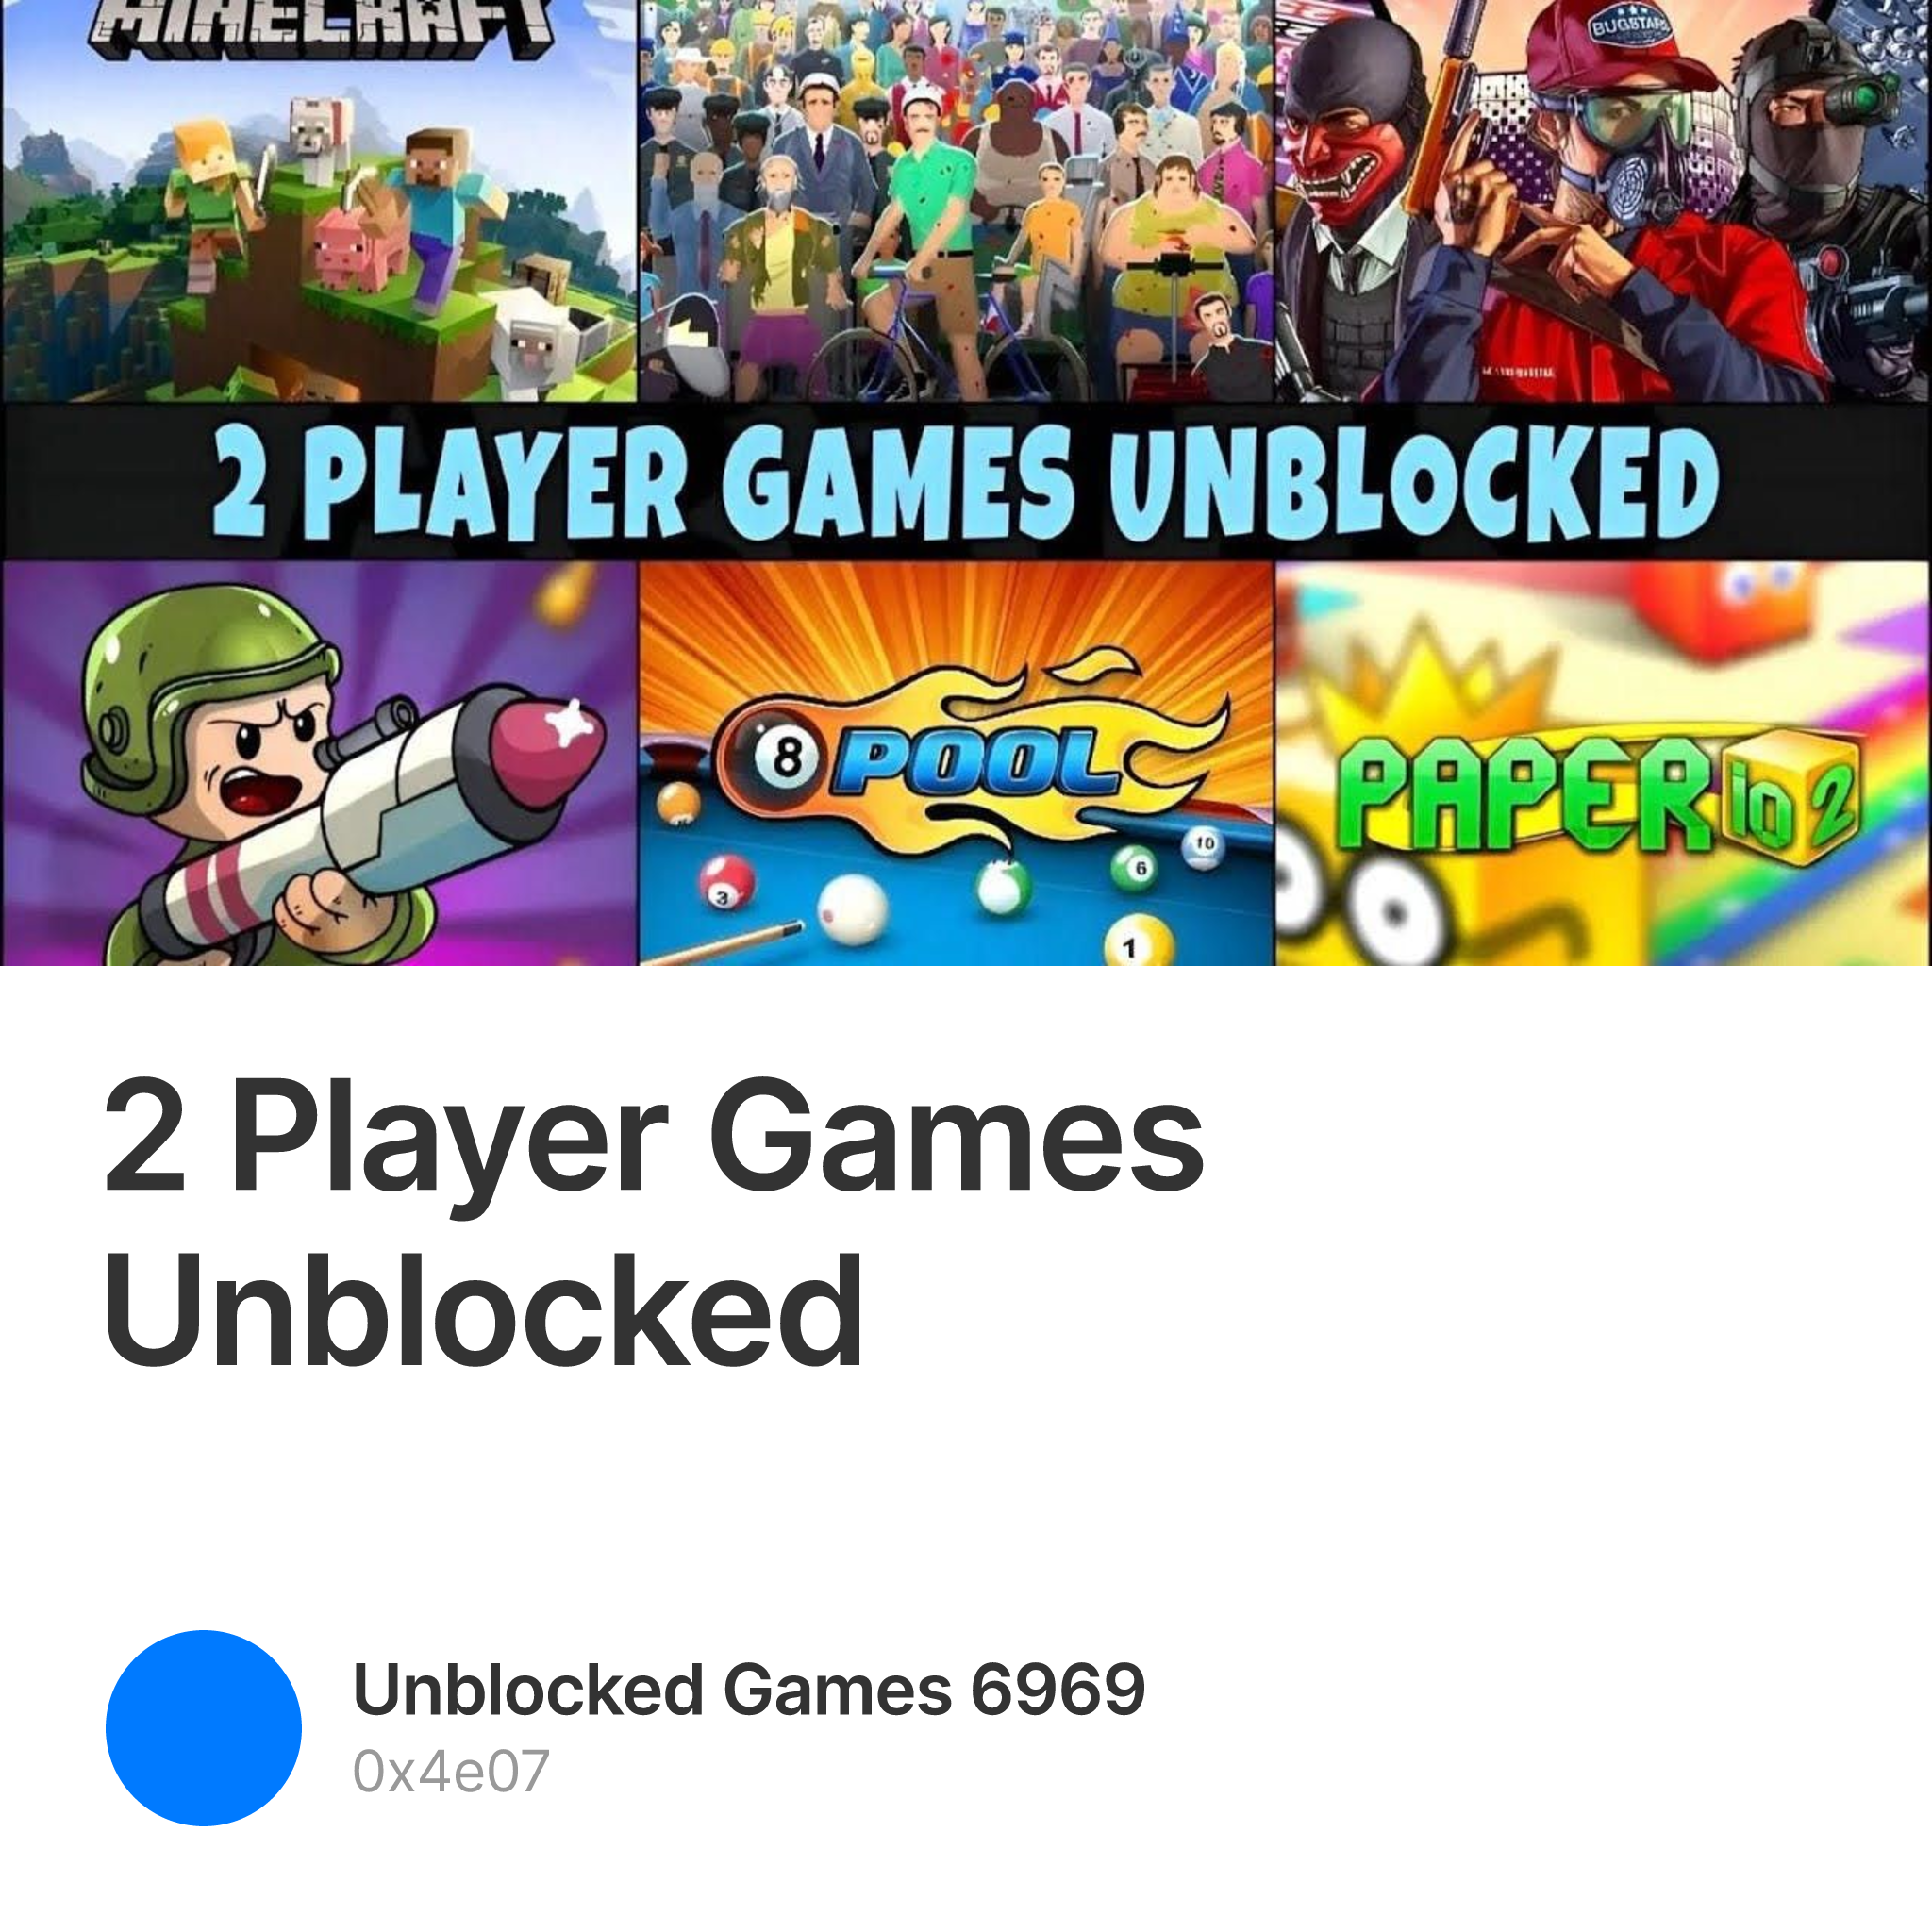 2 player games unblocked